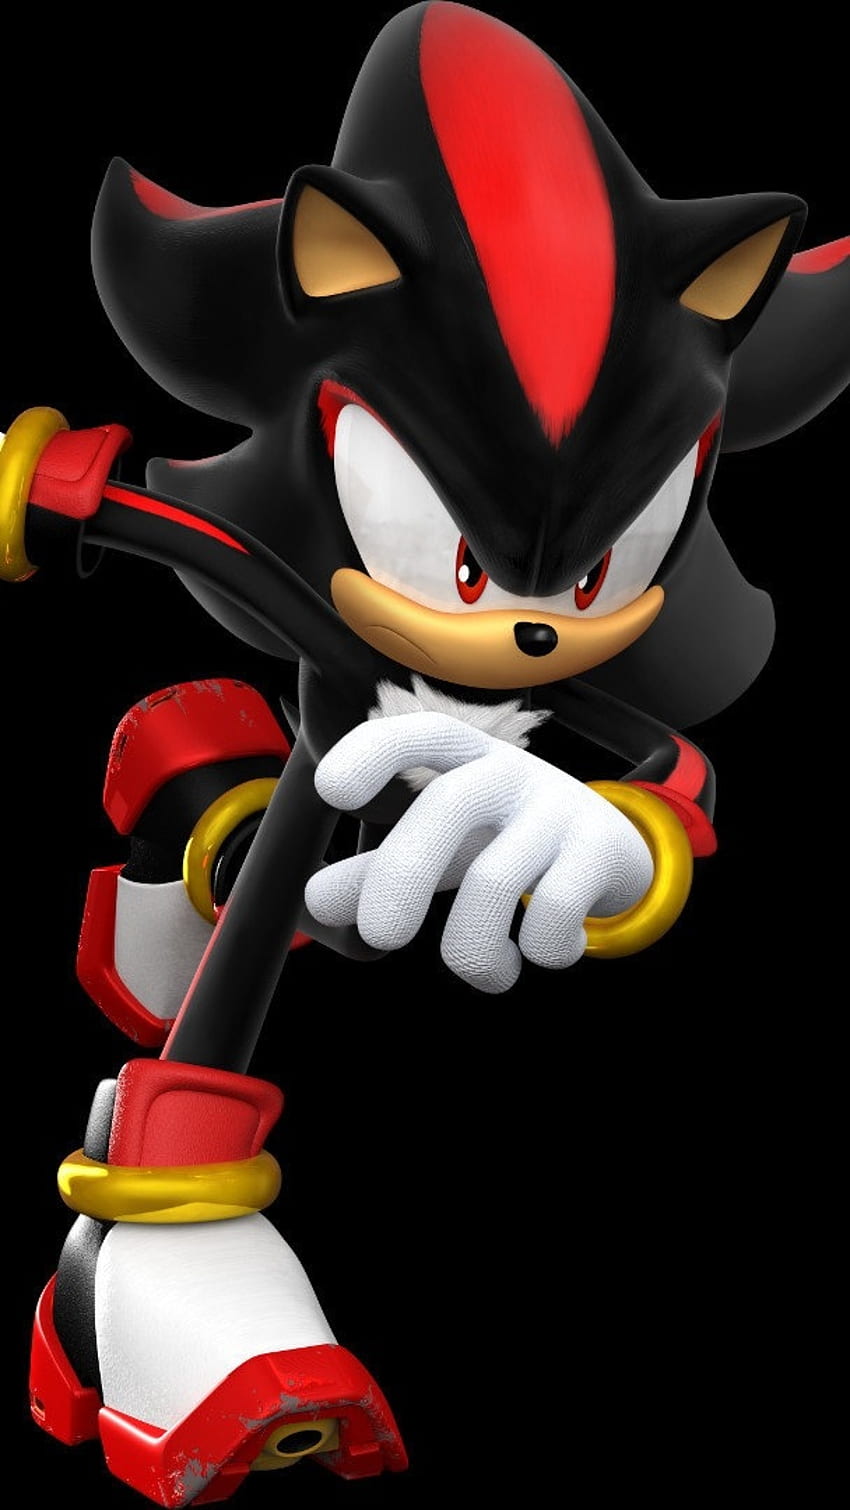 Shadow the Hedgehog In Red Background HD Sonic Wallpapers  HD Wallpapers   ID 48466